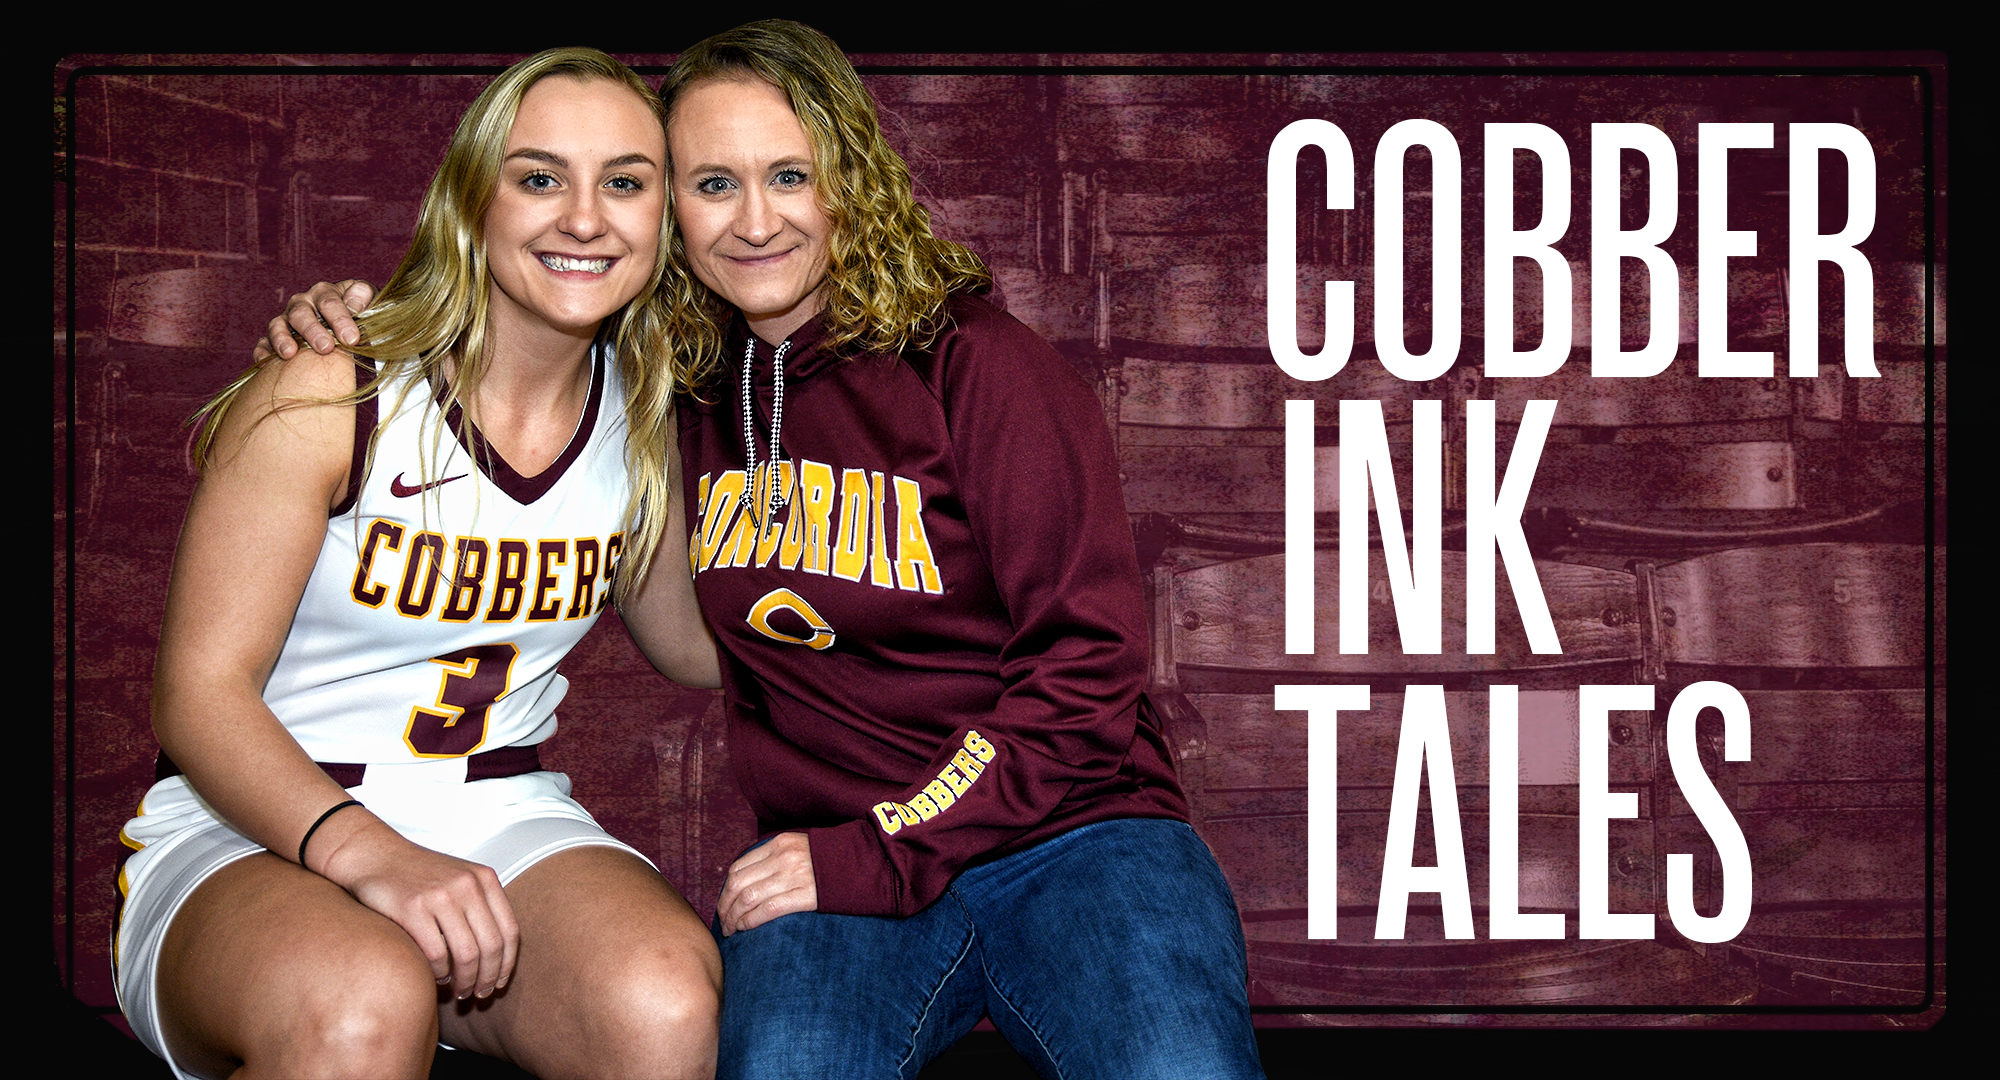 Cobber women's basketball All-Conference guard Autumn Thompson and her mother share a special bond and a common tattoo.